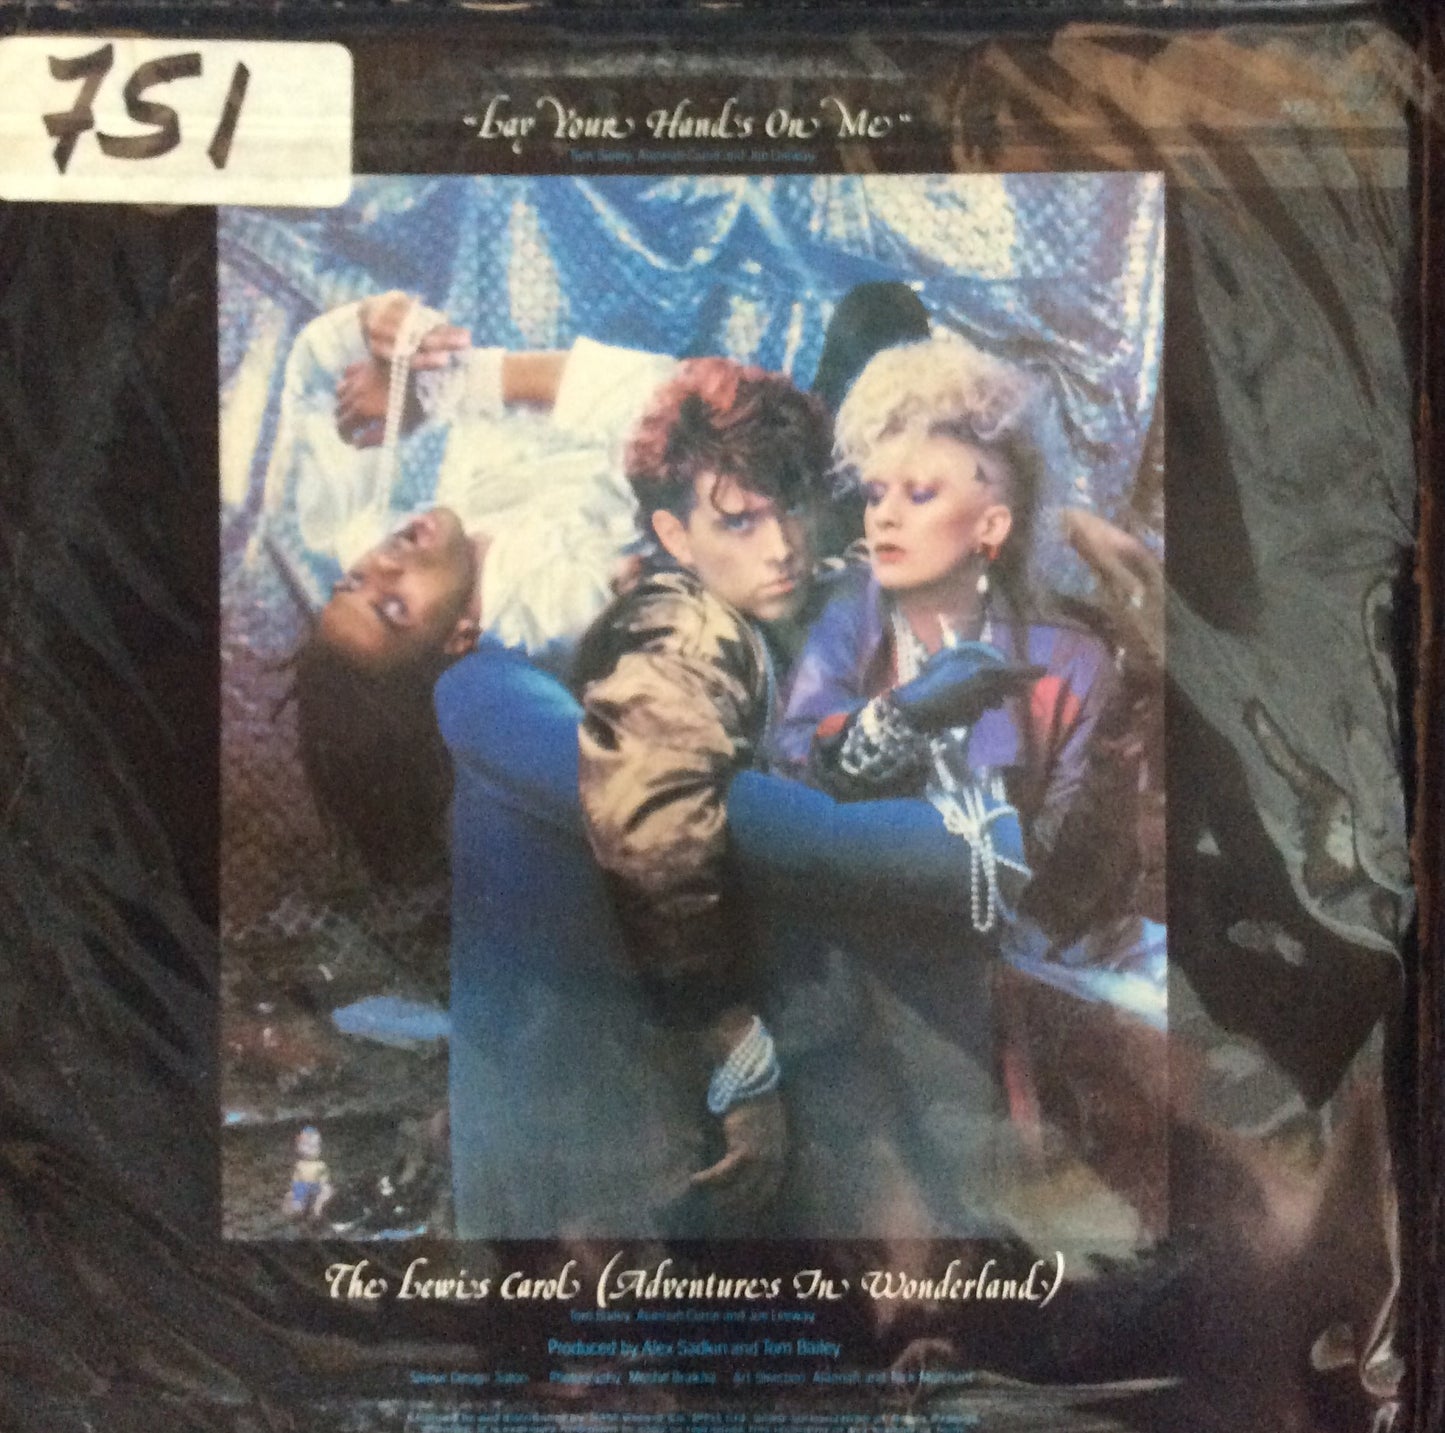 Thompson Twins - Lay Your Hands On Me (12" Maxi)